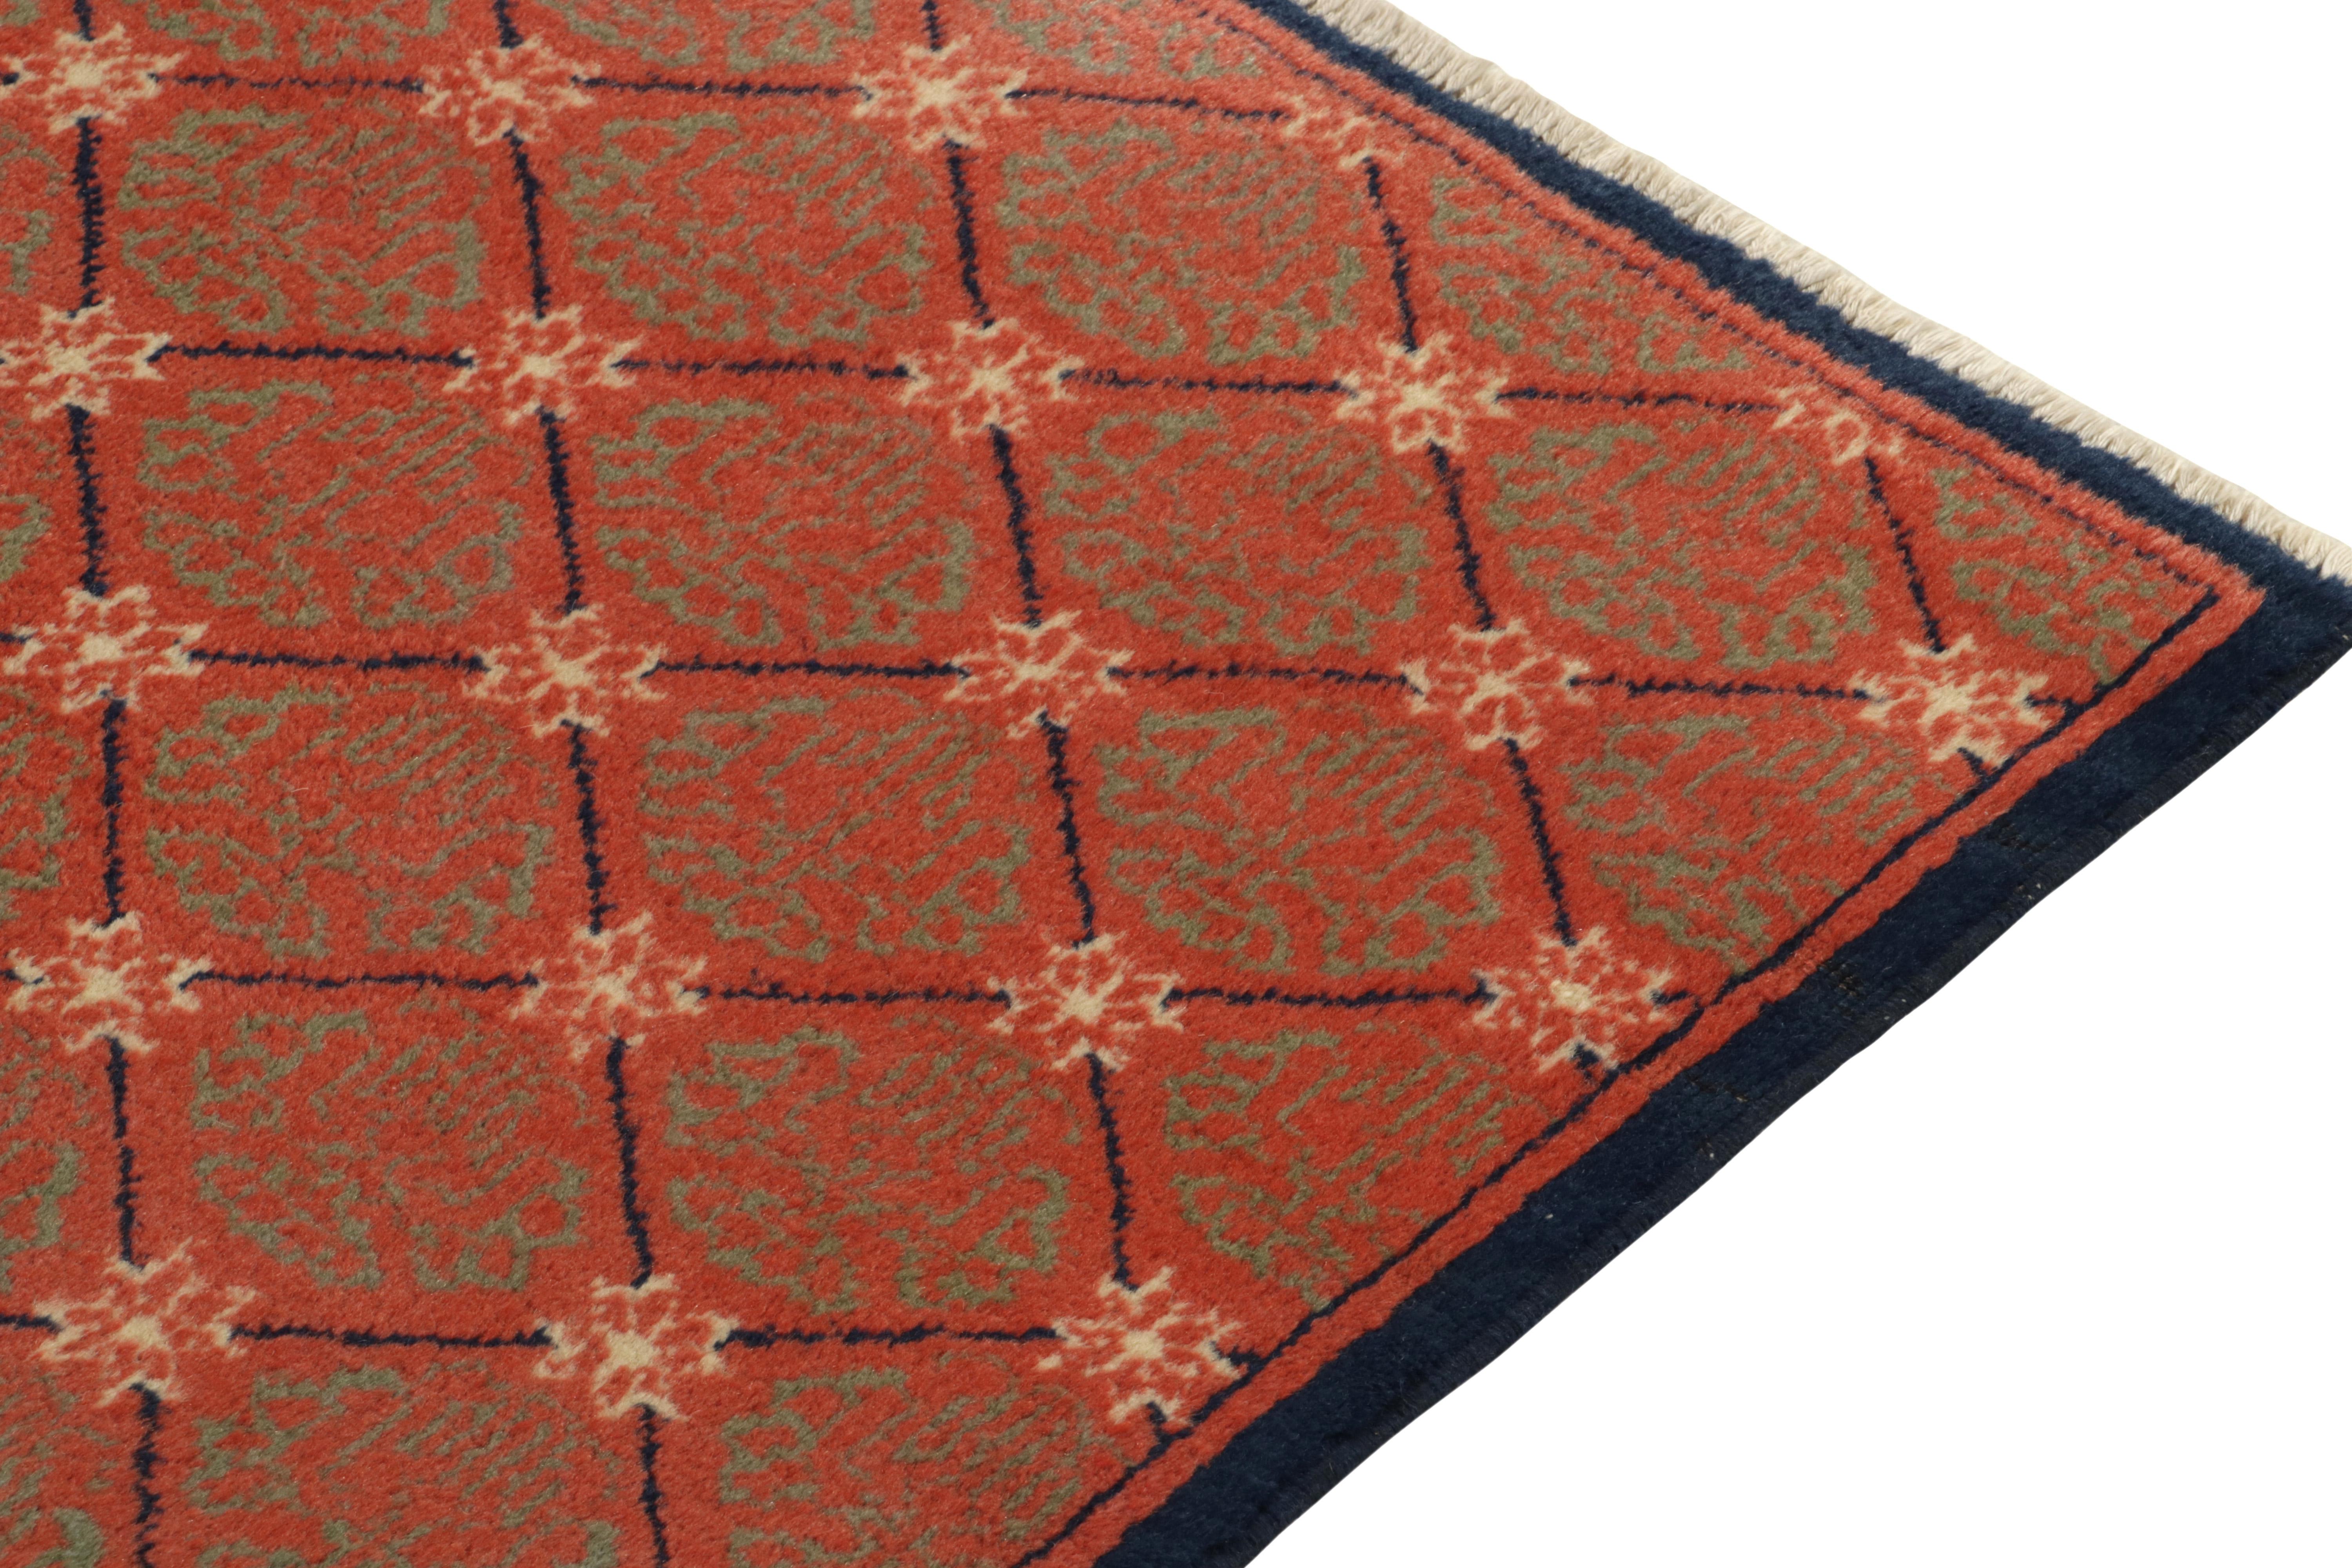 1960s Vintage Art Deco Rug in Red, Green Patterns and Blue Border by Rug & Kilim In Good Condition For Sale In Long Island City, NY